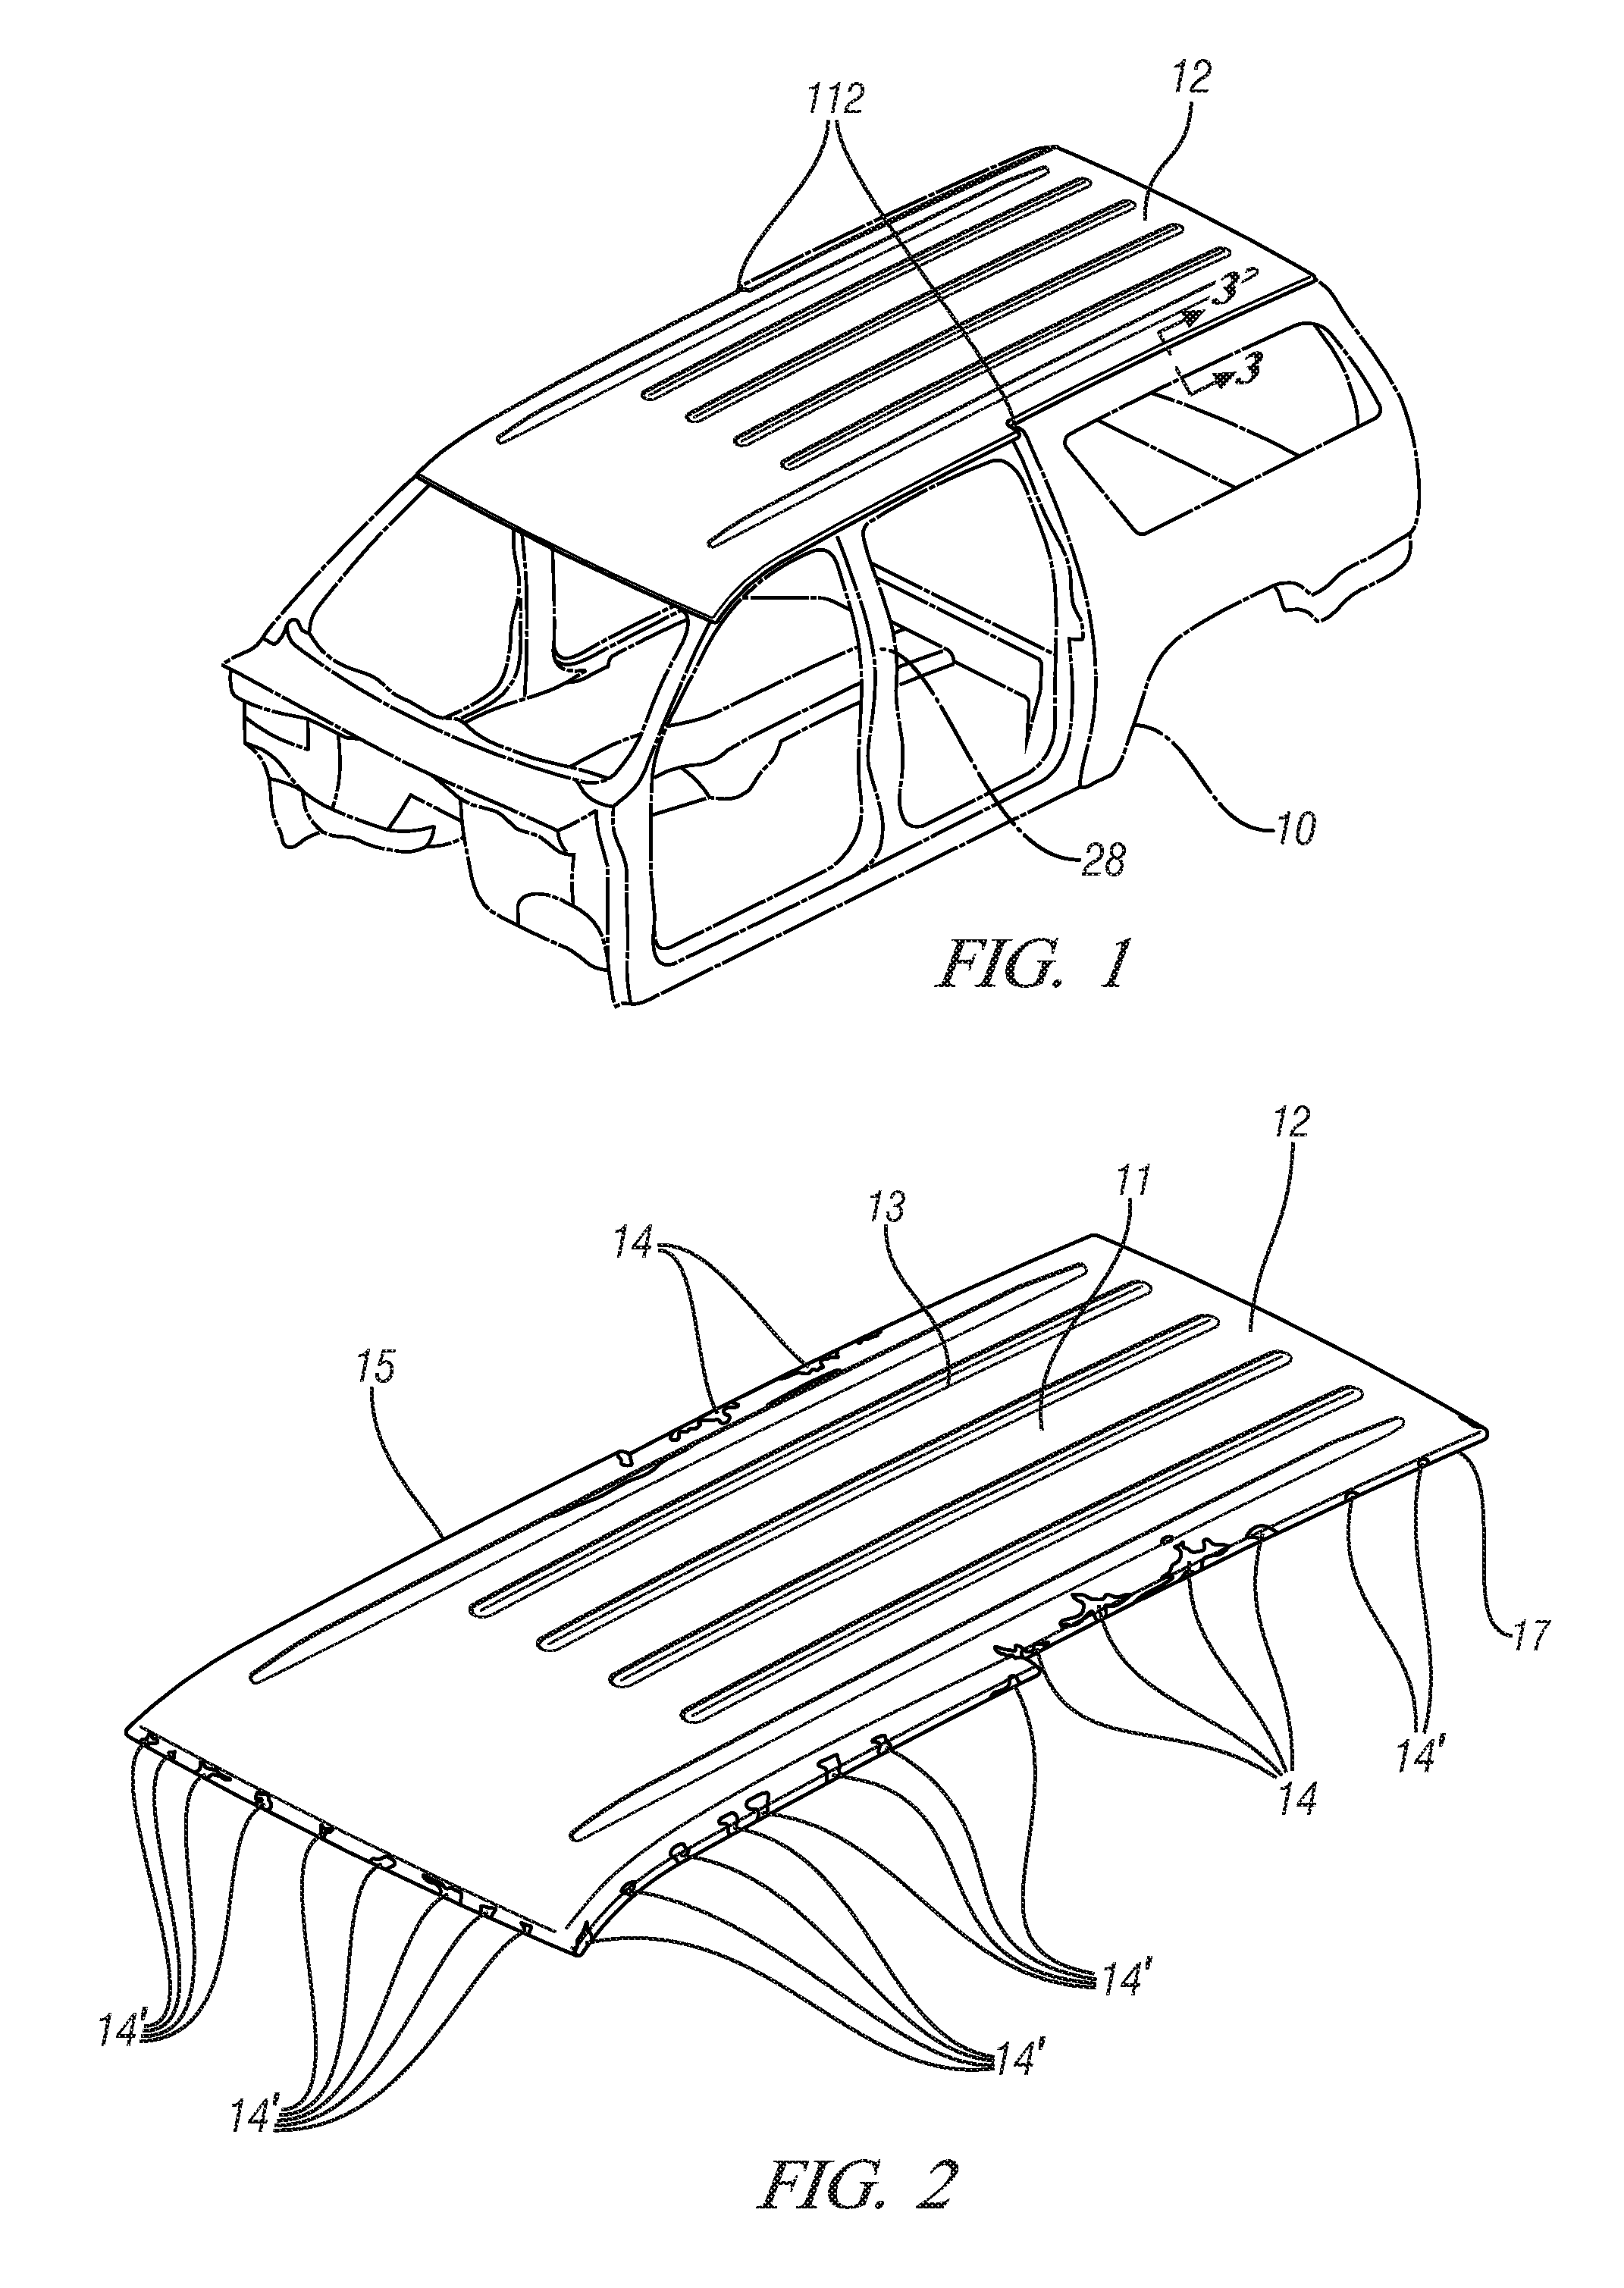 Aluminum roof panel for attachment to supporting steel vehicle body members